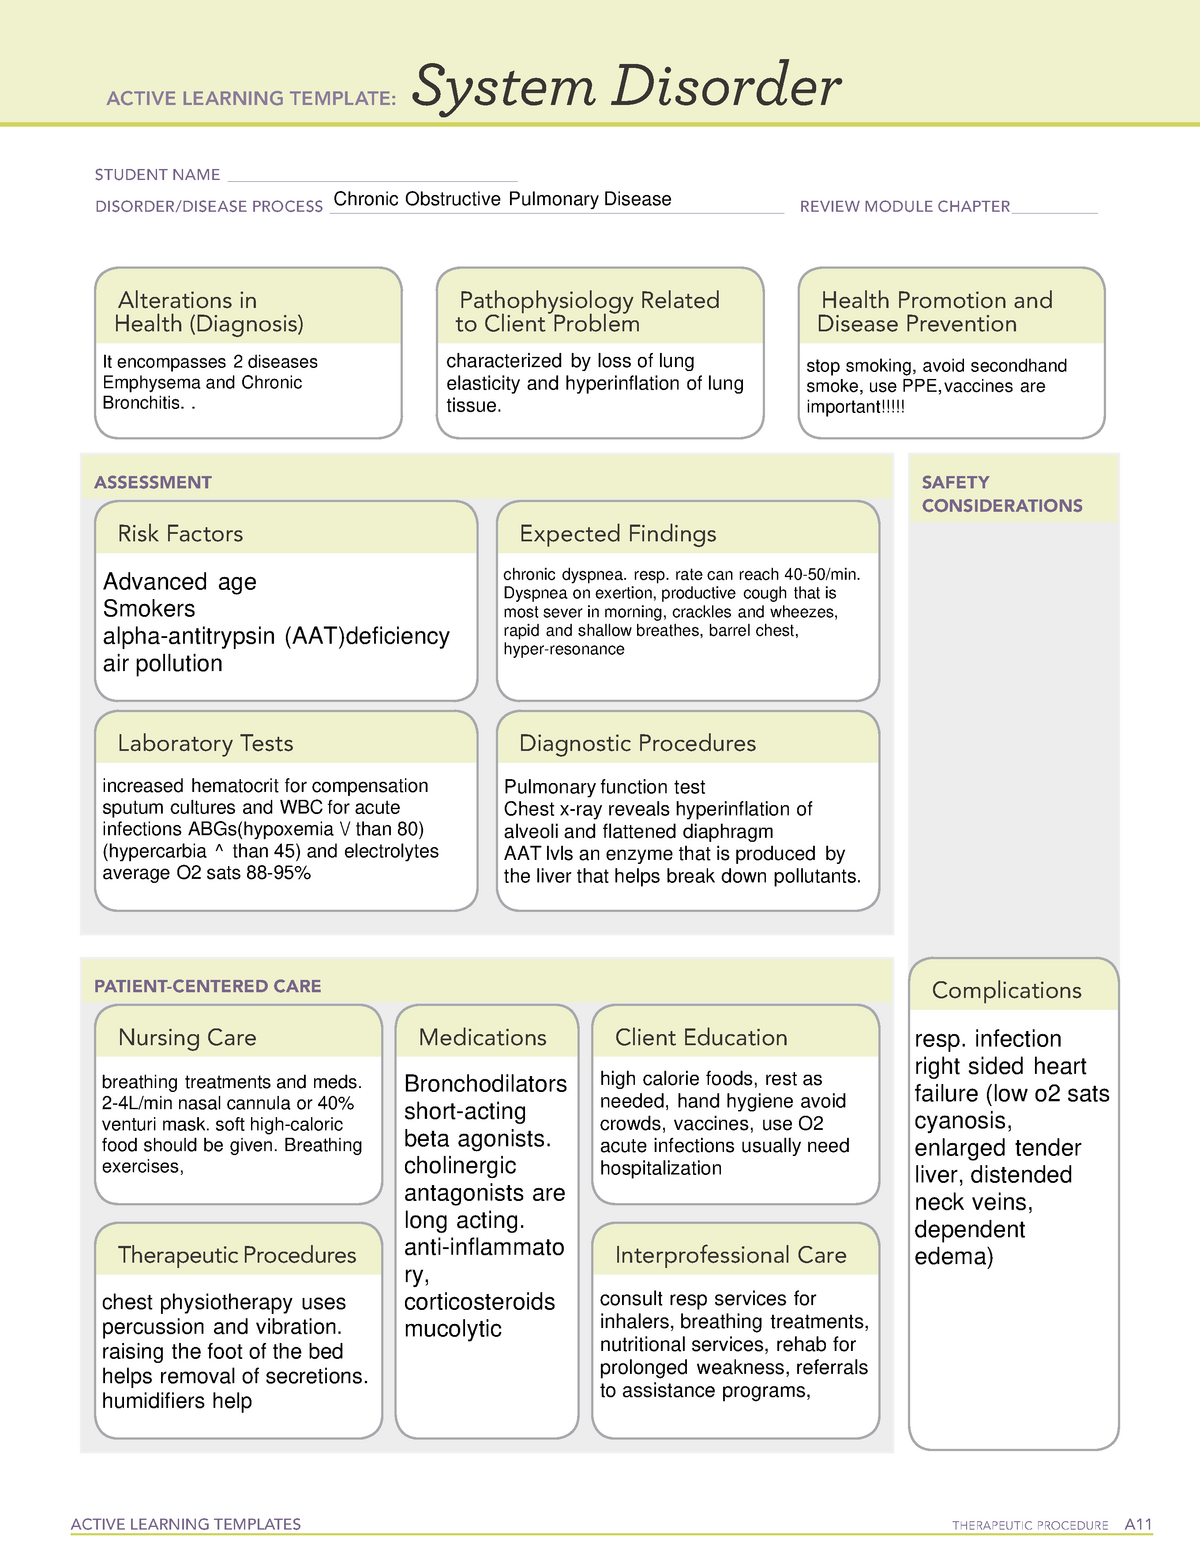 copd-disease-template-active-learning-templates-therapeutic-procedure-a-system-disorder